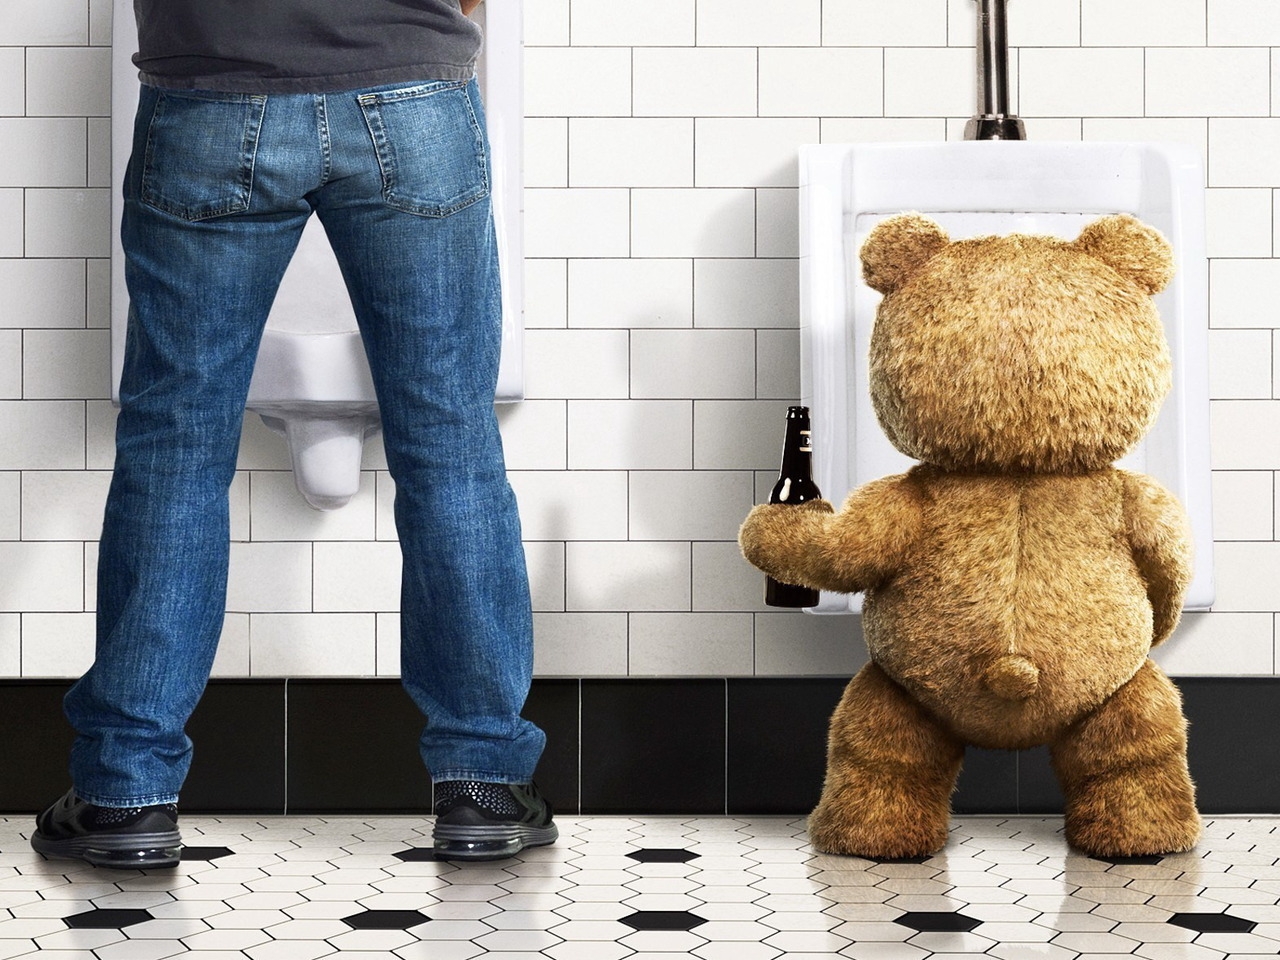 Ted Movie for 1280 x 960 resolution